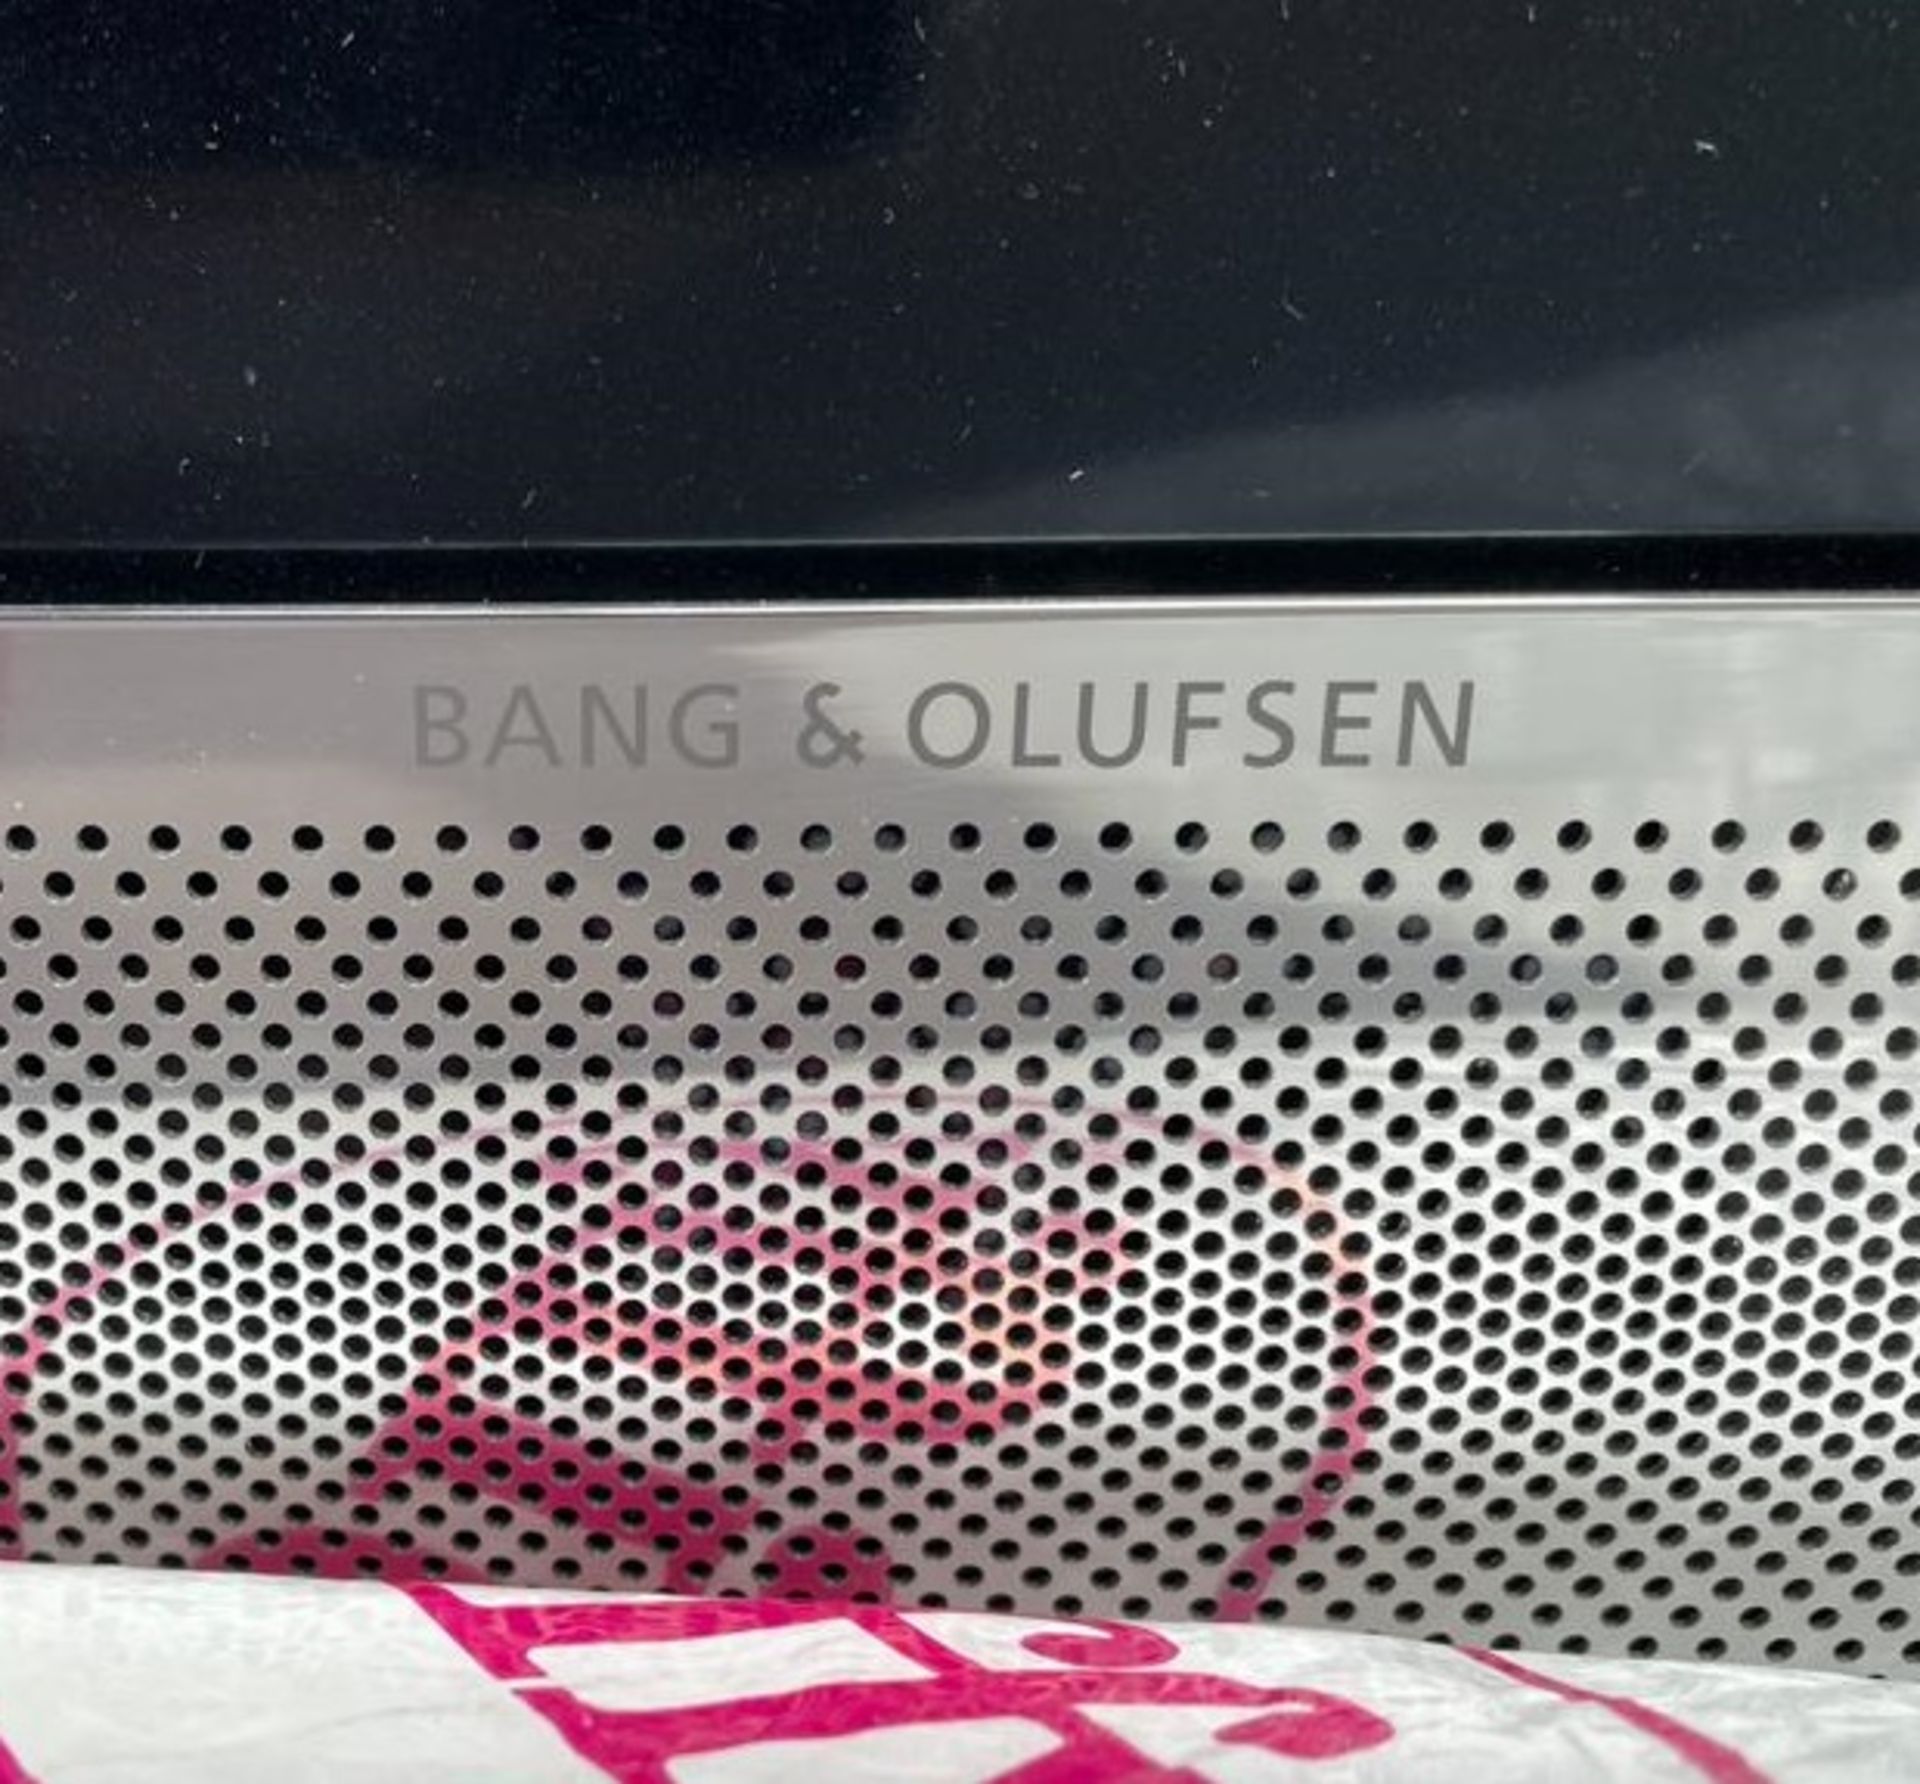 1 x Bang and Olufsen BeoVision 65 Inch Television - In Good Condition and Working Order - Slim - Image 2 of 5